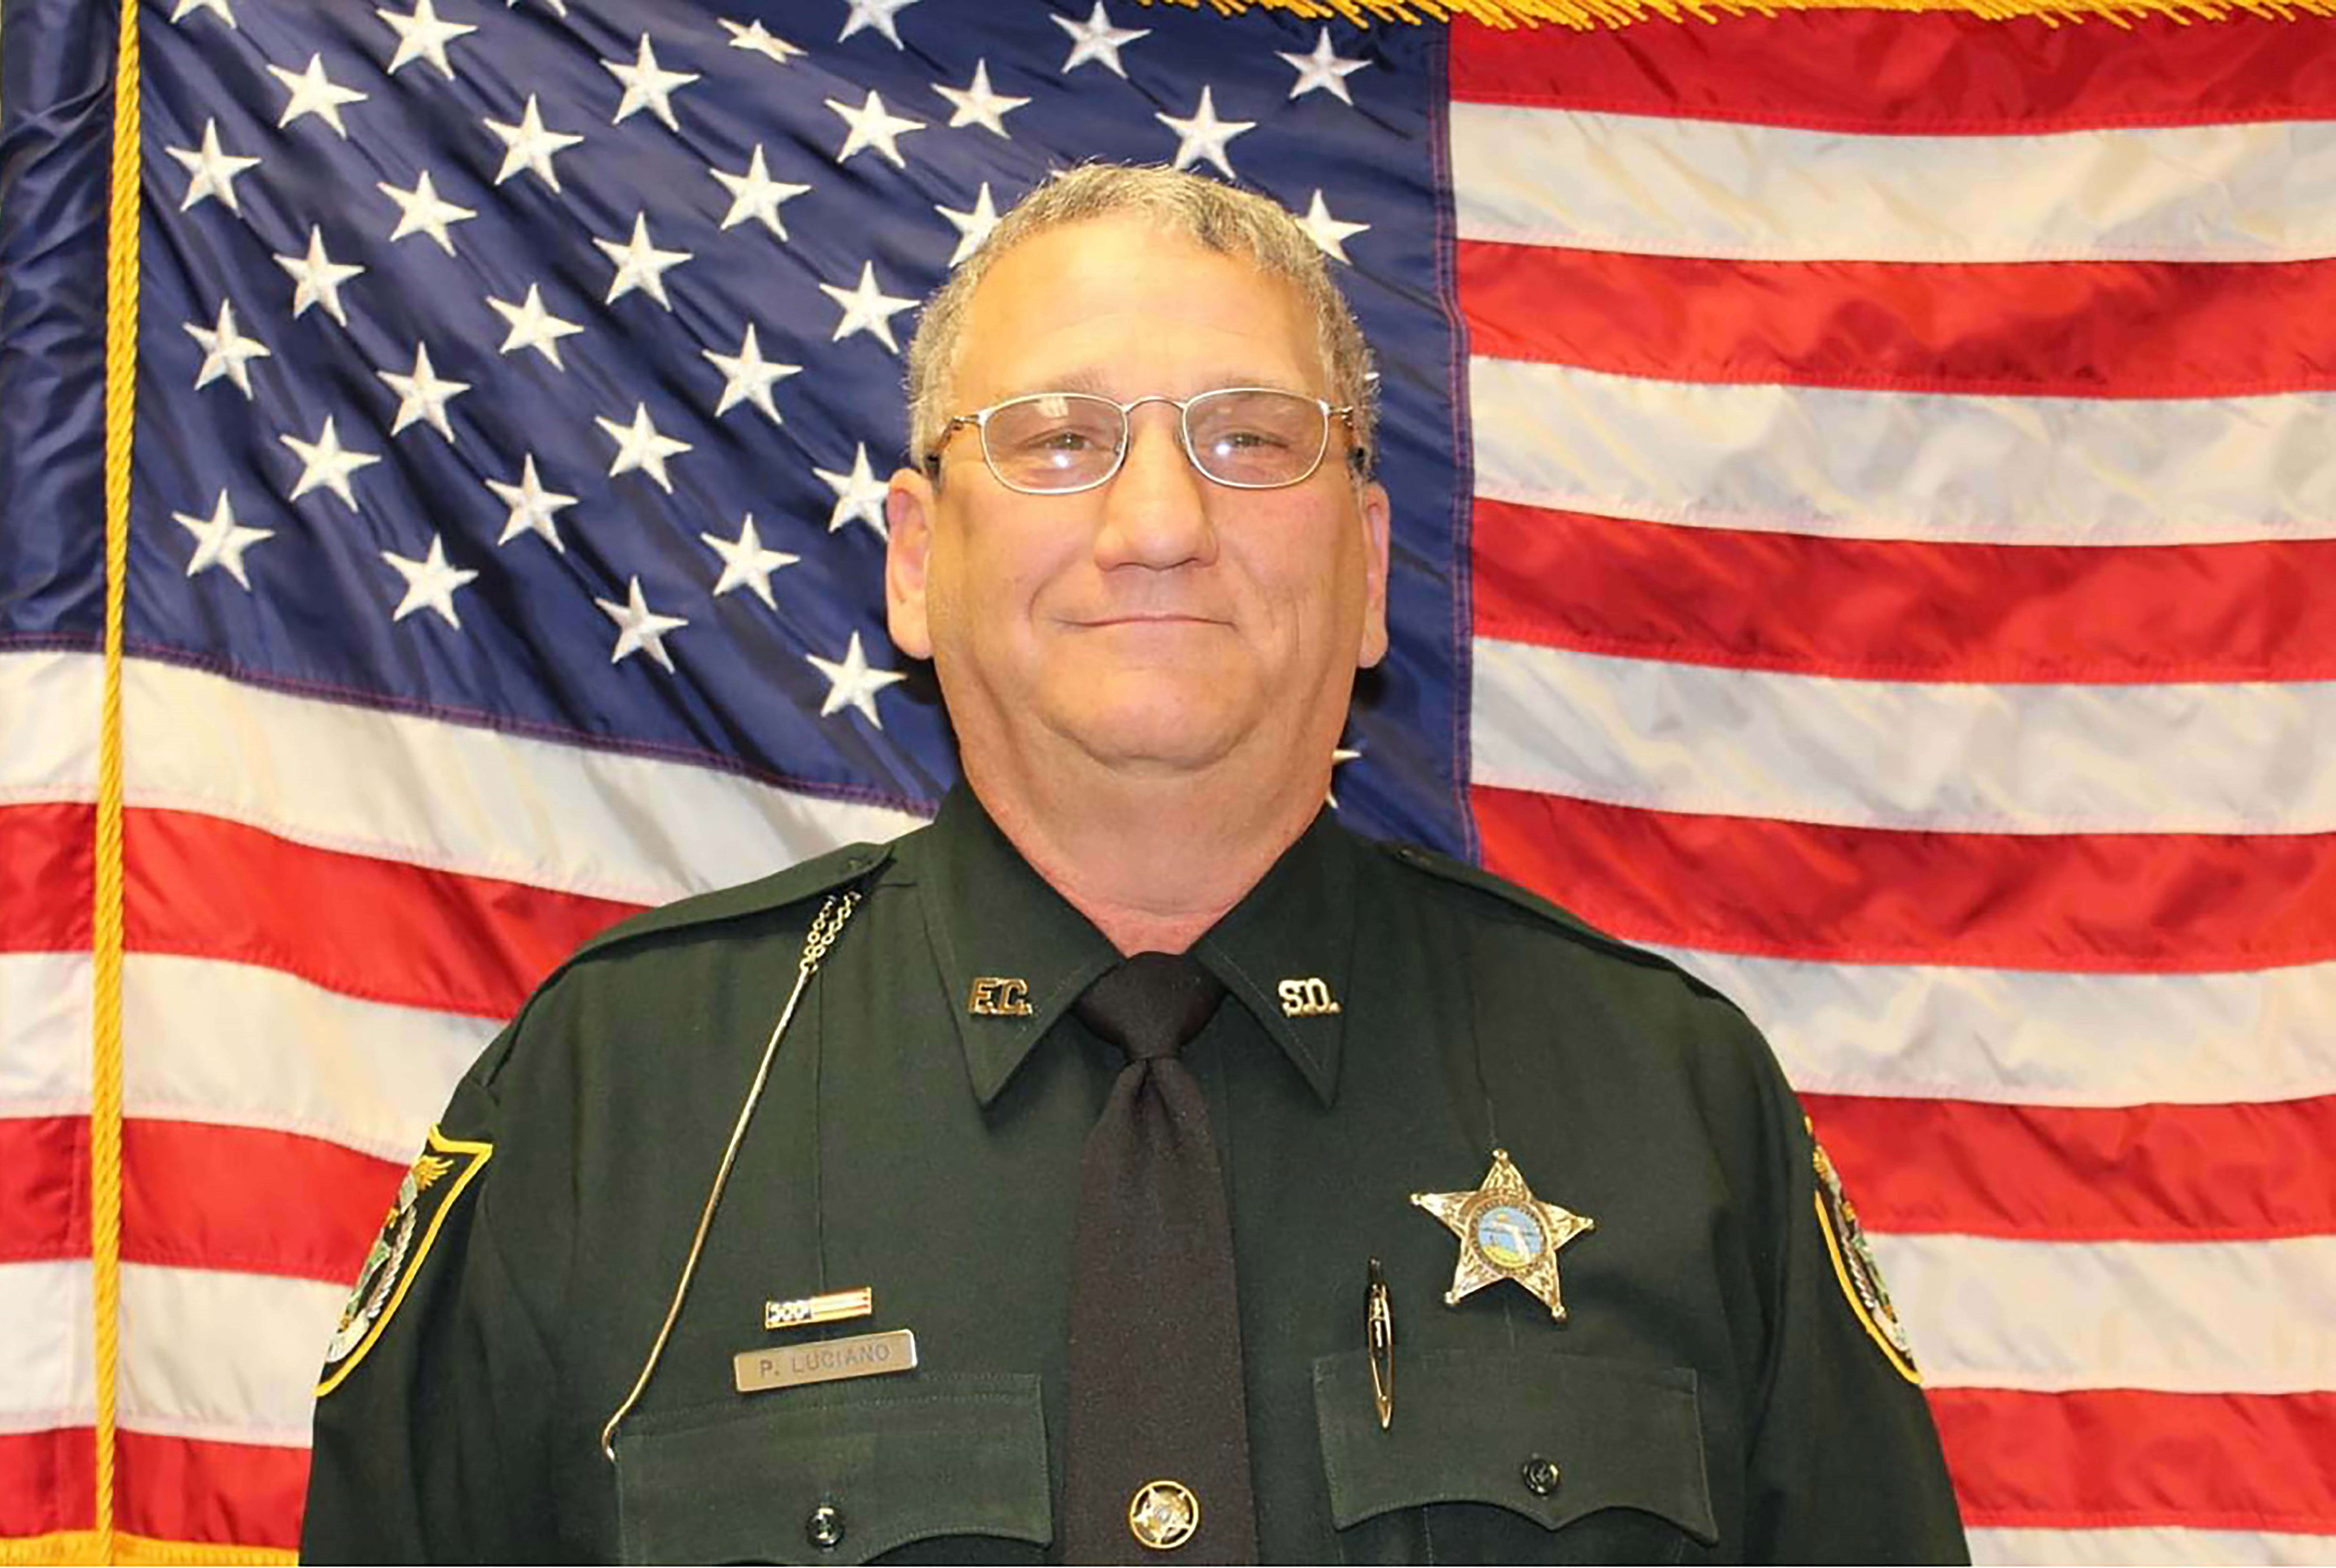 Deputy First Class Paul Luciano | Flagler County Sheriff's Office, Florida